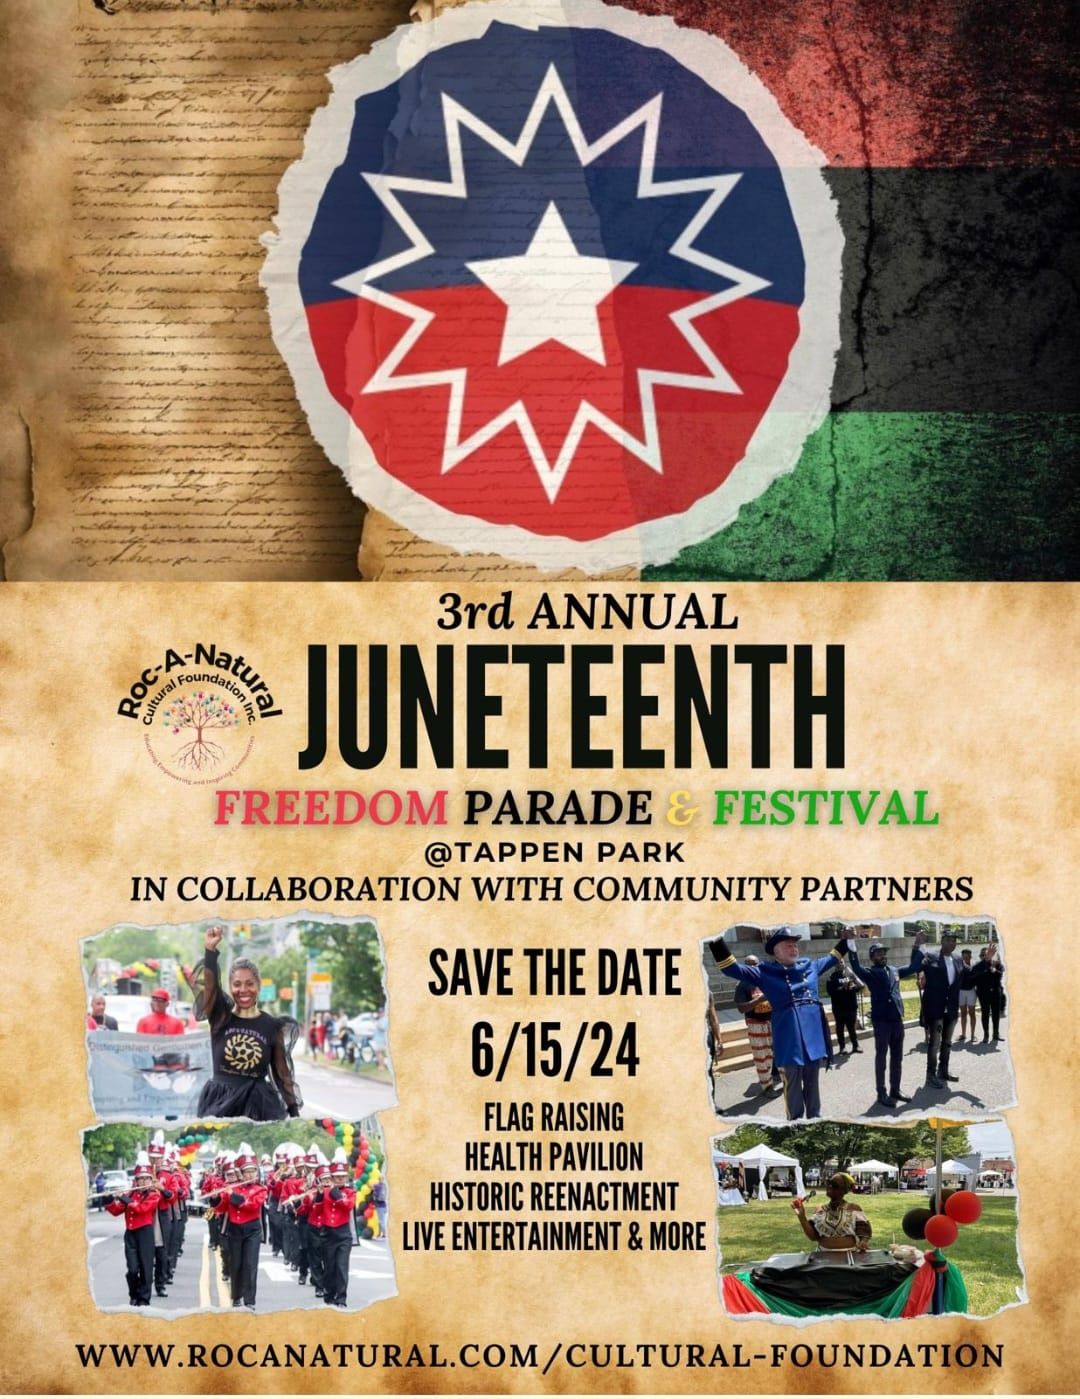 3rd Annual Juneteenth Freedom Parade & Festival at Tappen Park 